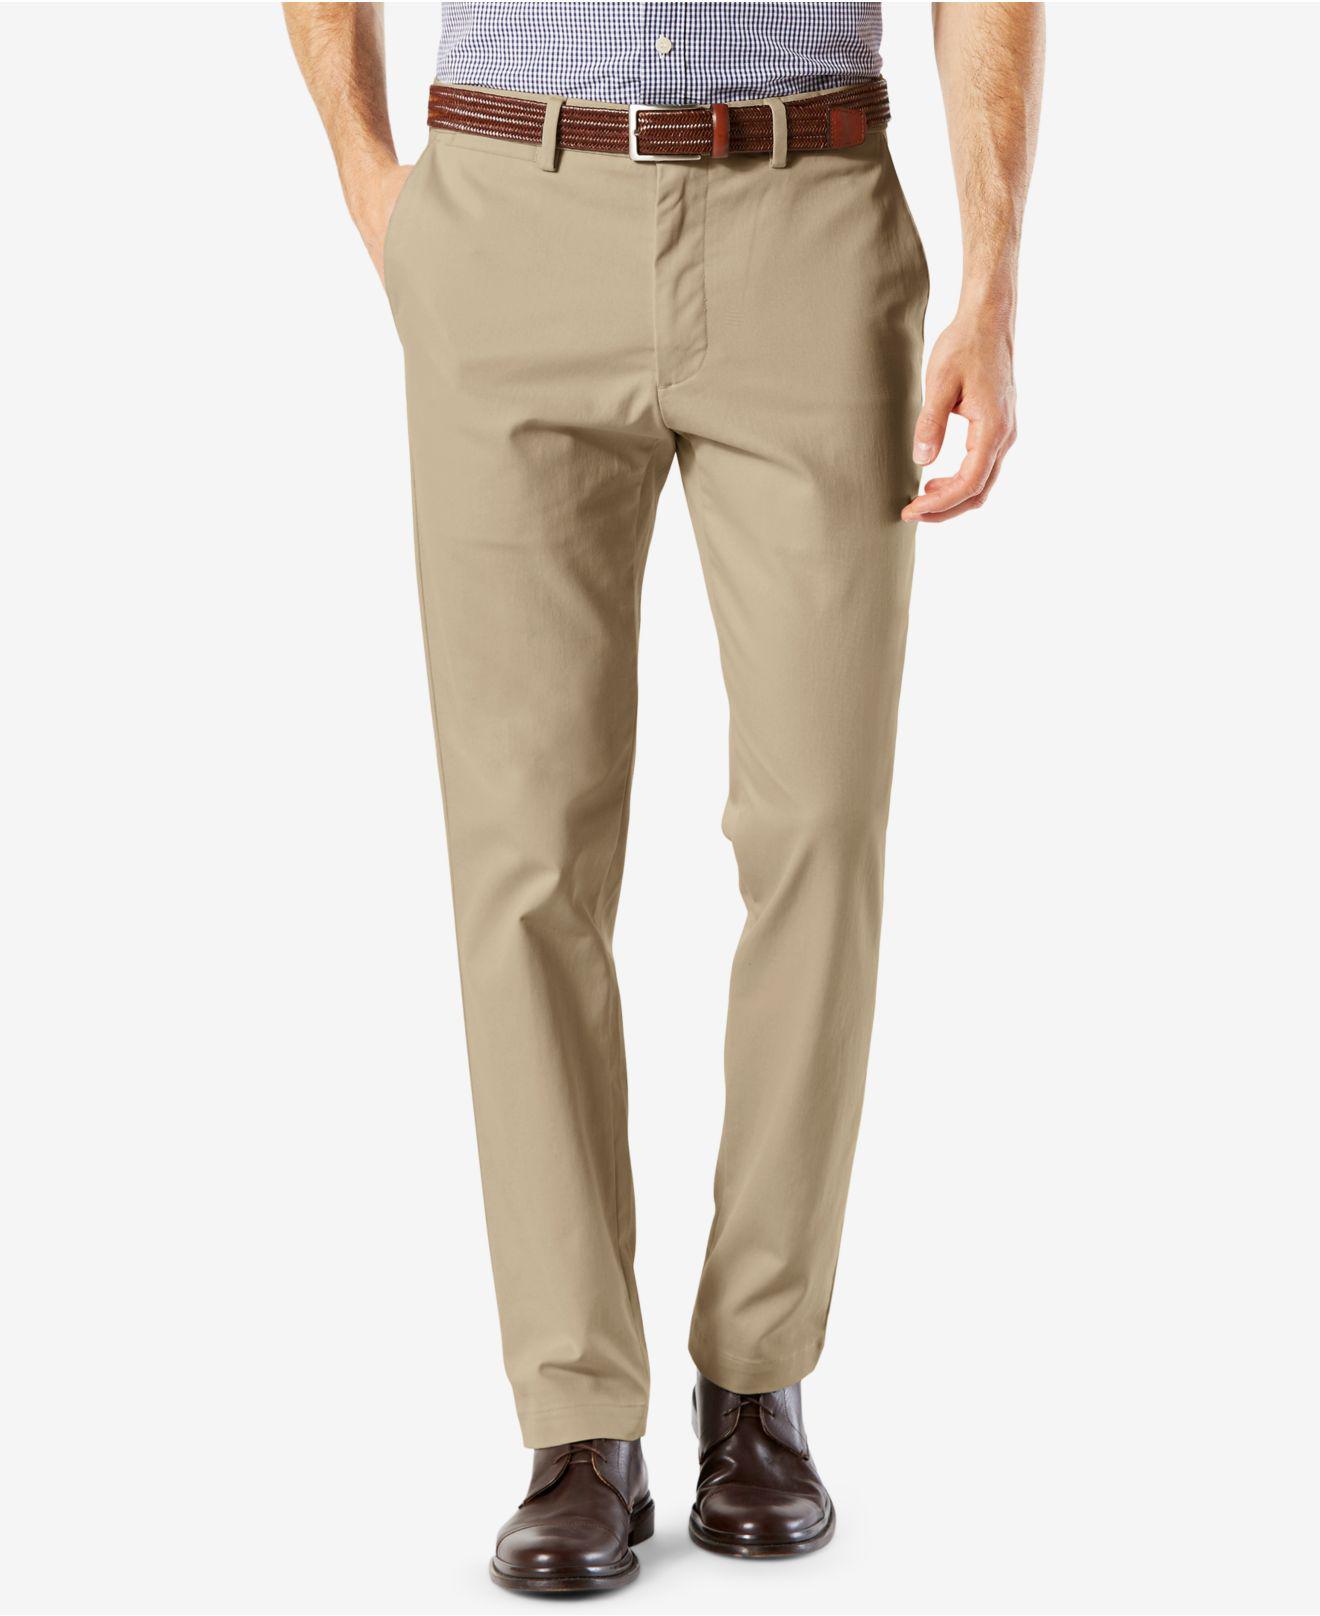 Dockers Signature Lux Cotton Slim Fit Stretch Khaki Pants in Natural ...